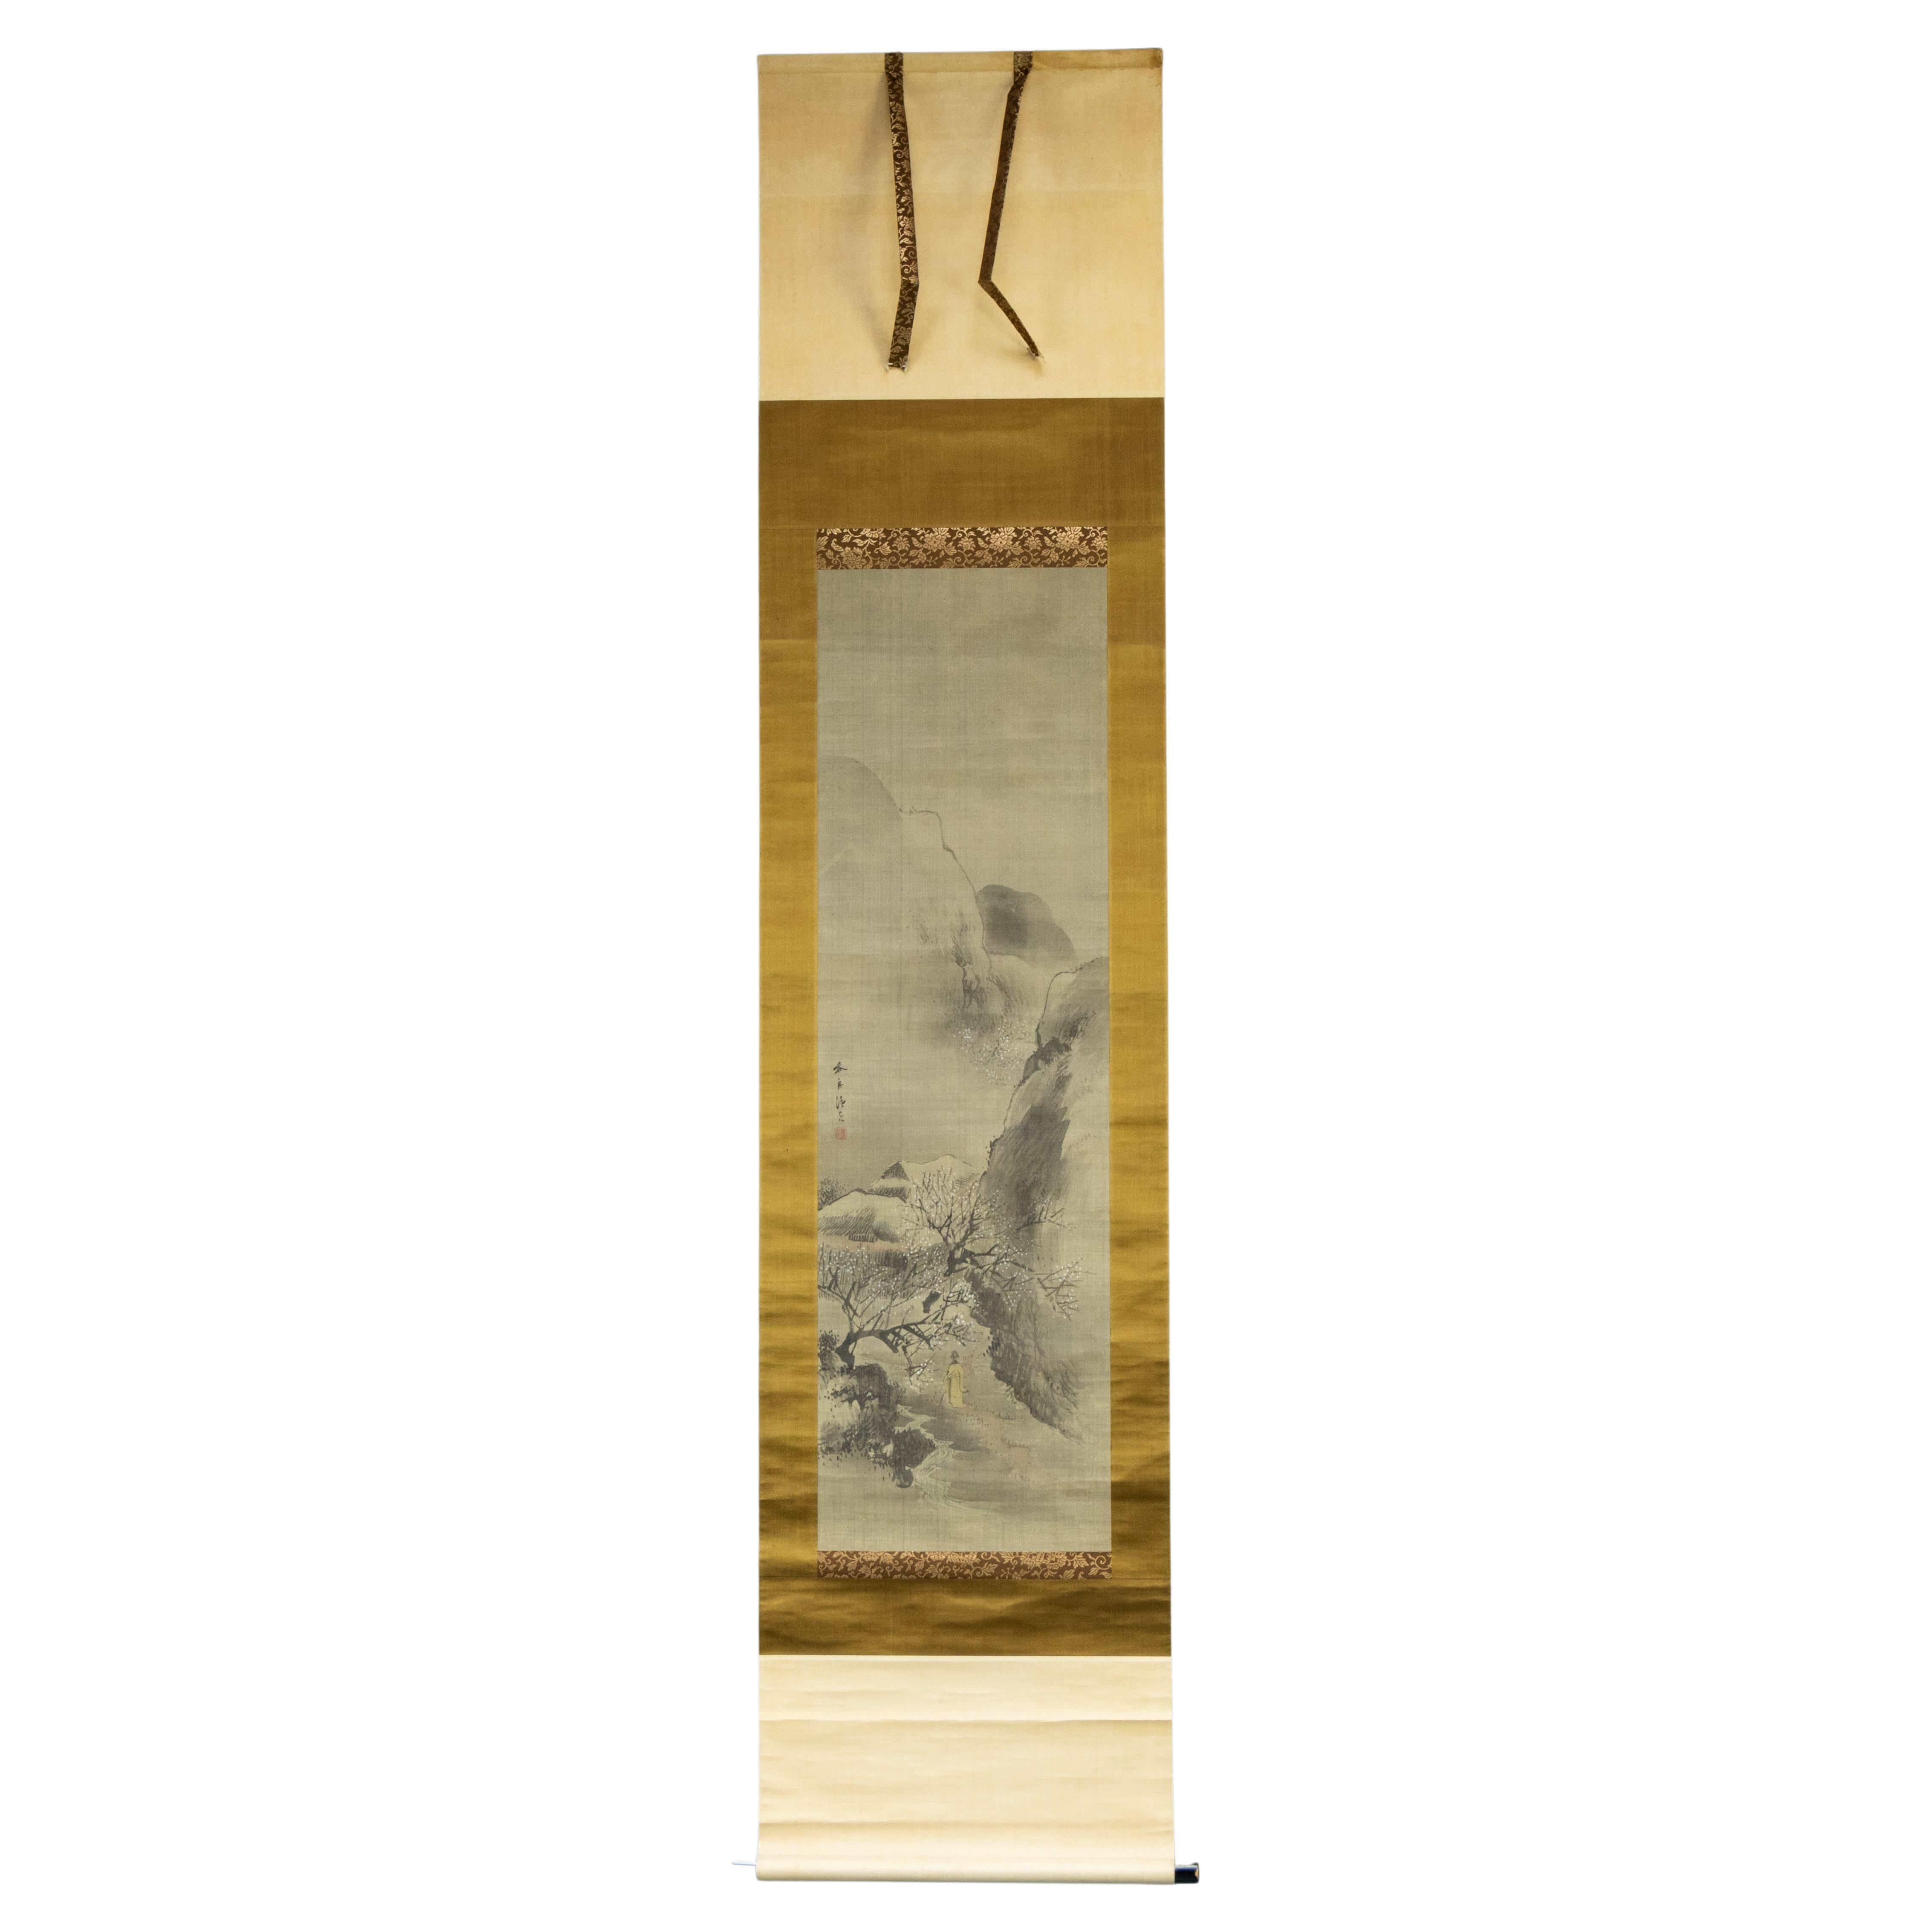 Ôhara Donshû (1792 - 1857) Edo Period - Smell of Plums in the Night. Scroll  For Sale